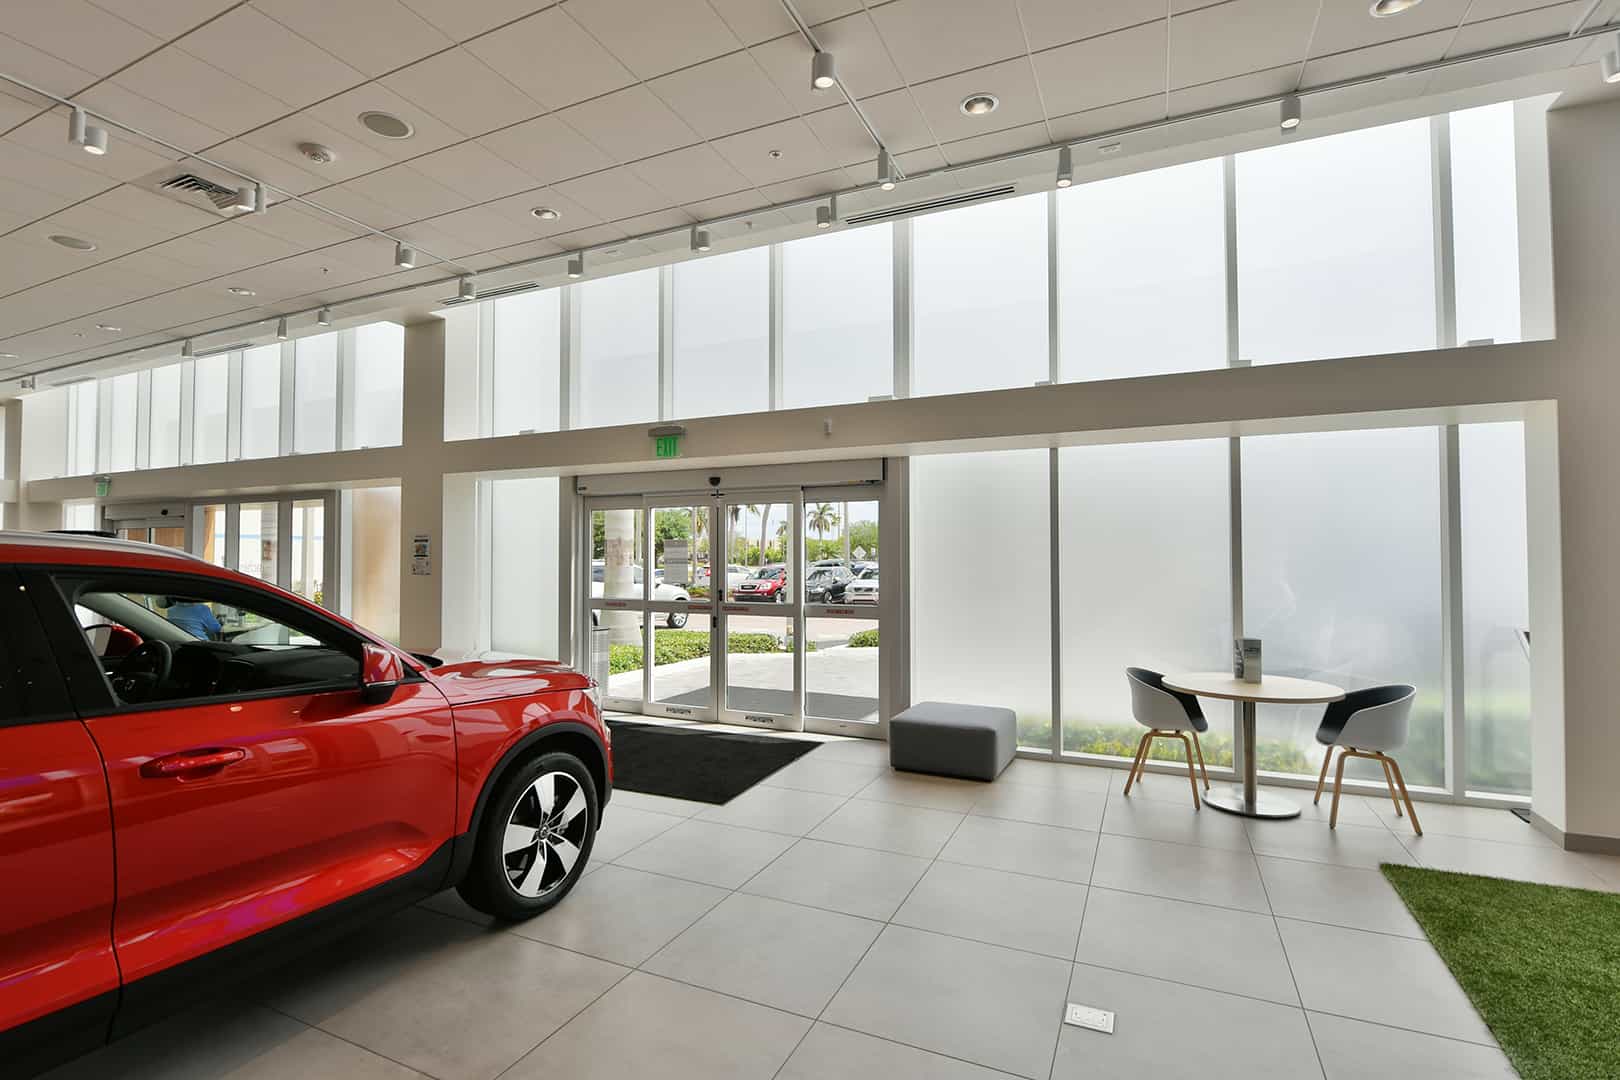 Interior view of car dealership looking through frosted FS-300 Maximum View Impact Storefront windows by Aldora, two sets of sliding glass doors, white tile floor and ceiling, seating area, red showcase vehicle in room